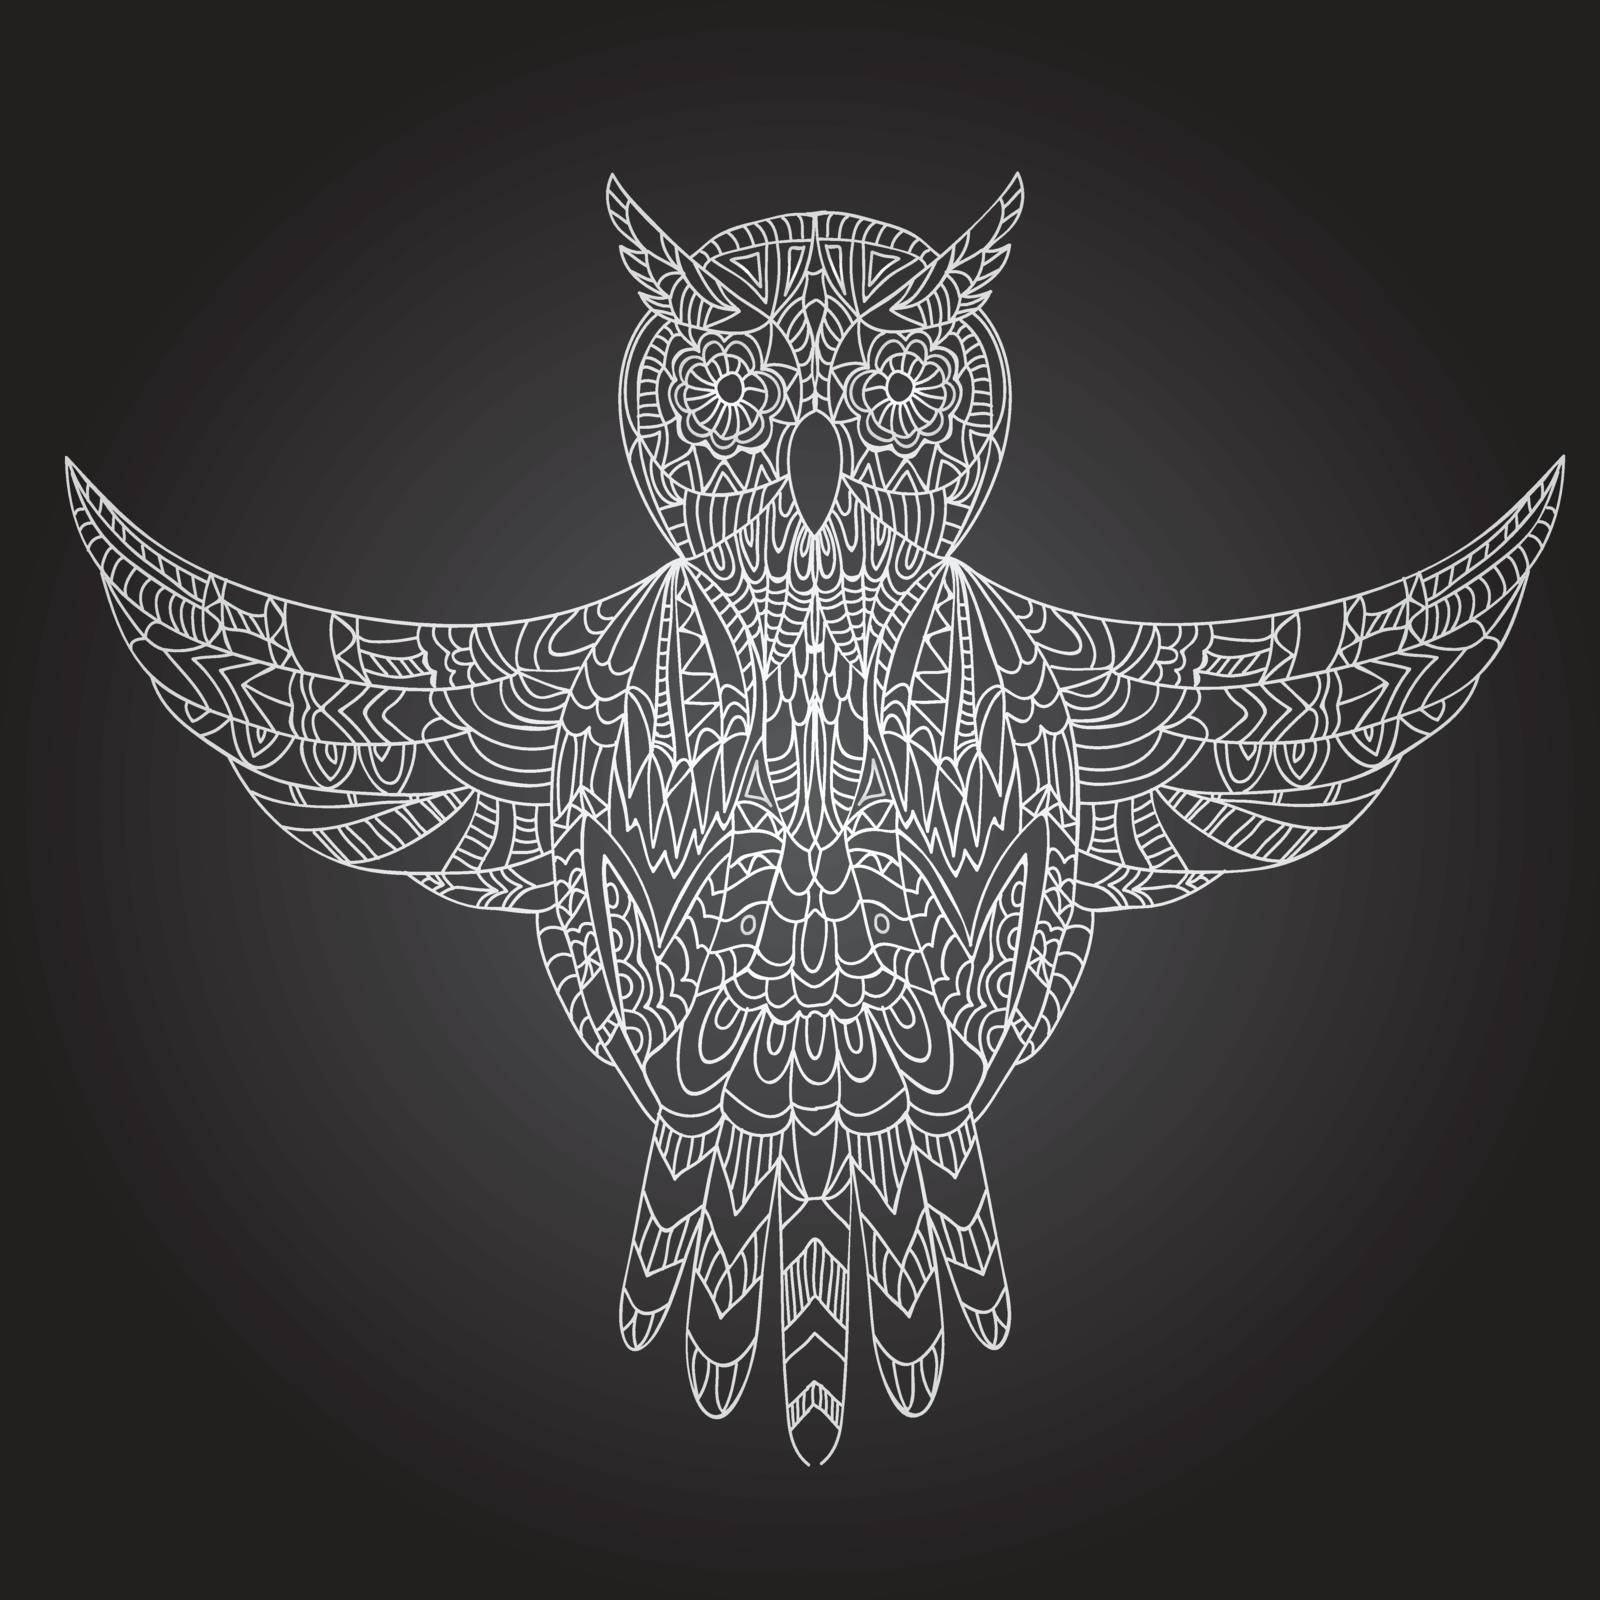 Ornamental hand drawn owl -  Vector illustration - doodle style